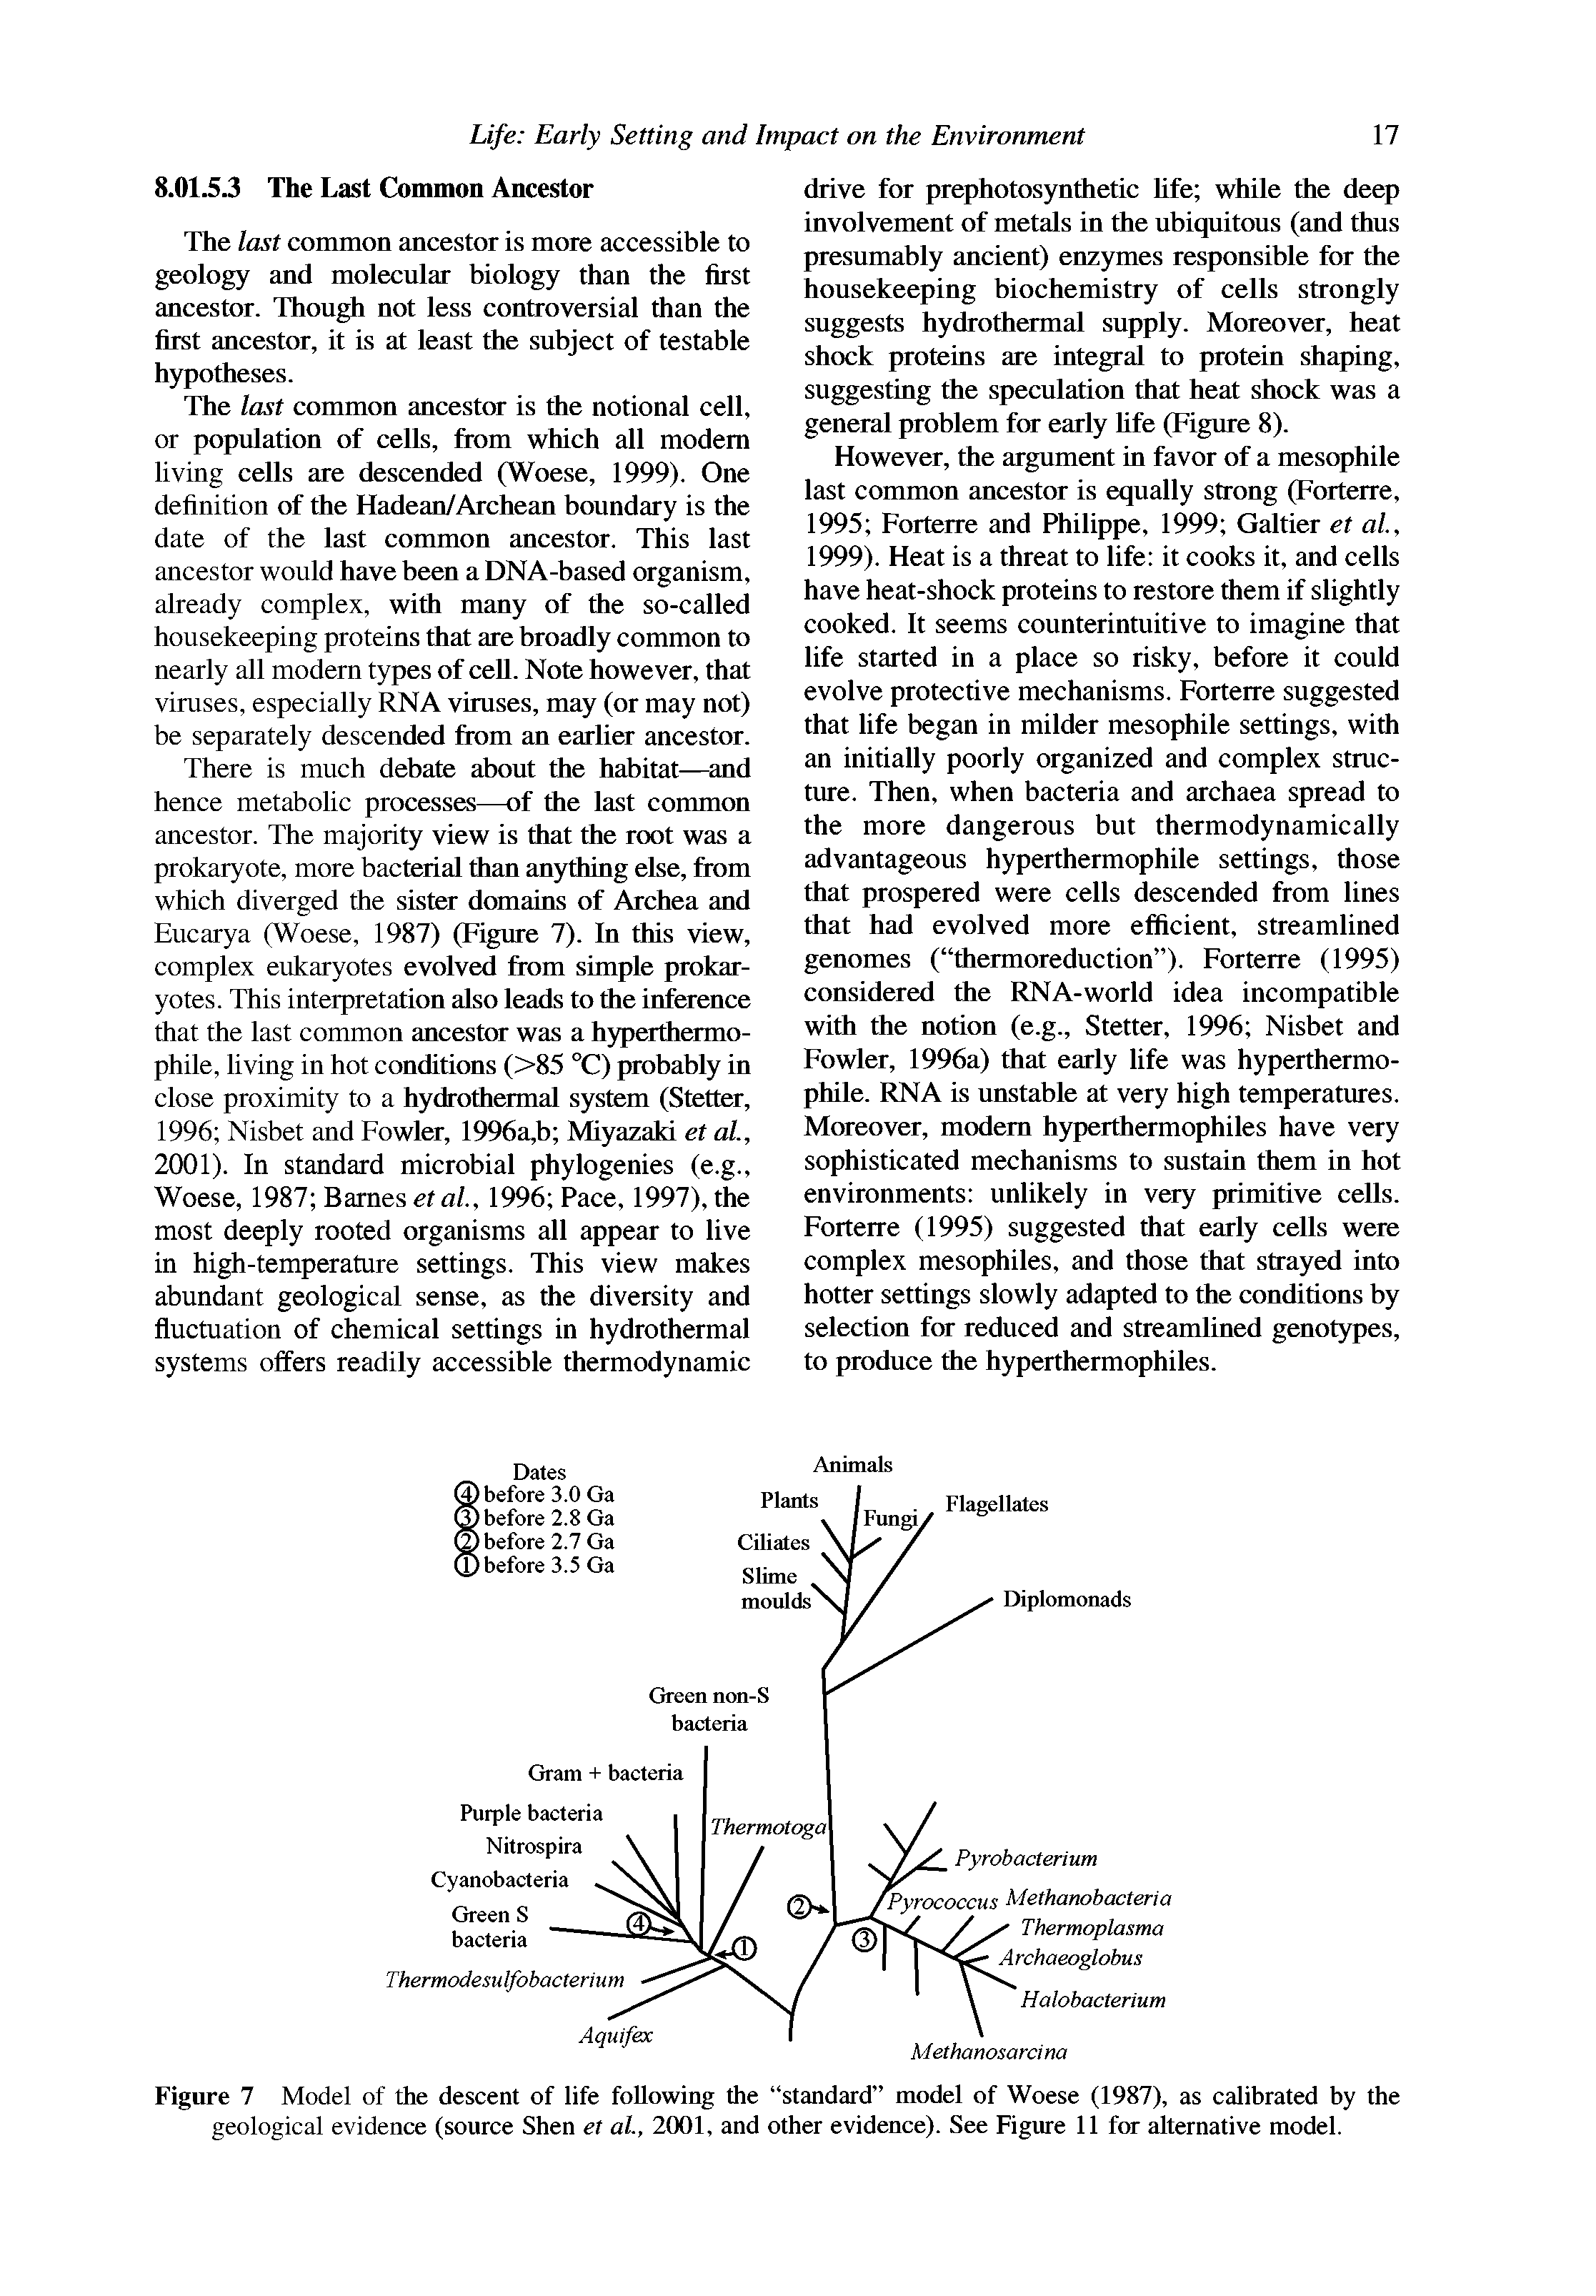 Figure 7 Model of the descent of life following the standard model of Woese (1987), as calibrated by the geological evidence (source Shen et al, 2001, and other evidence). See Figure 11 for alternative model.